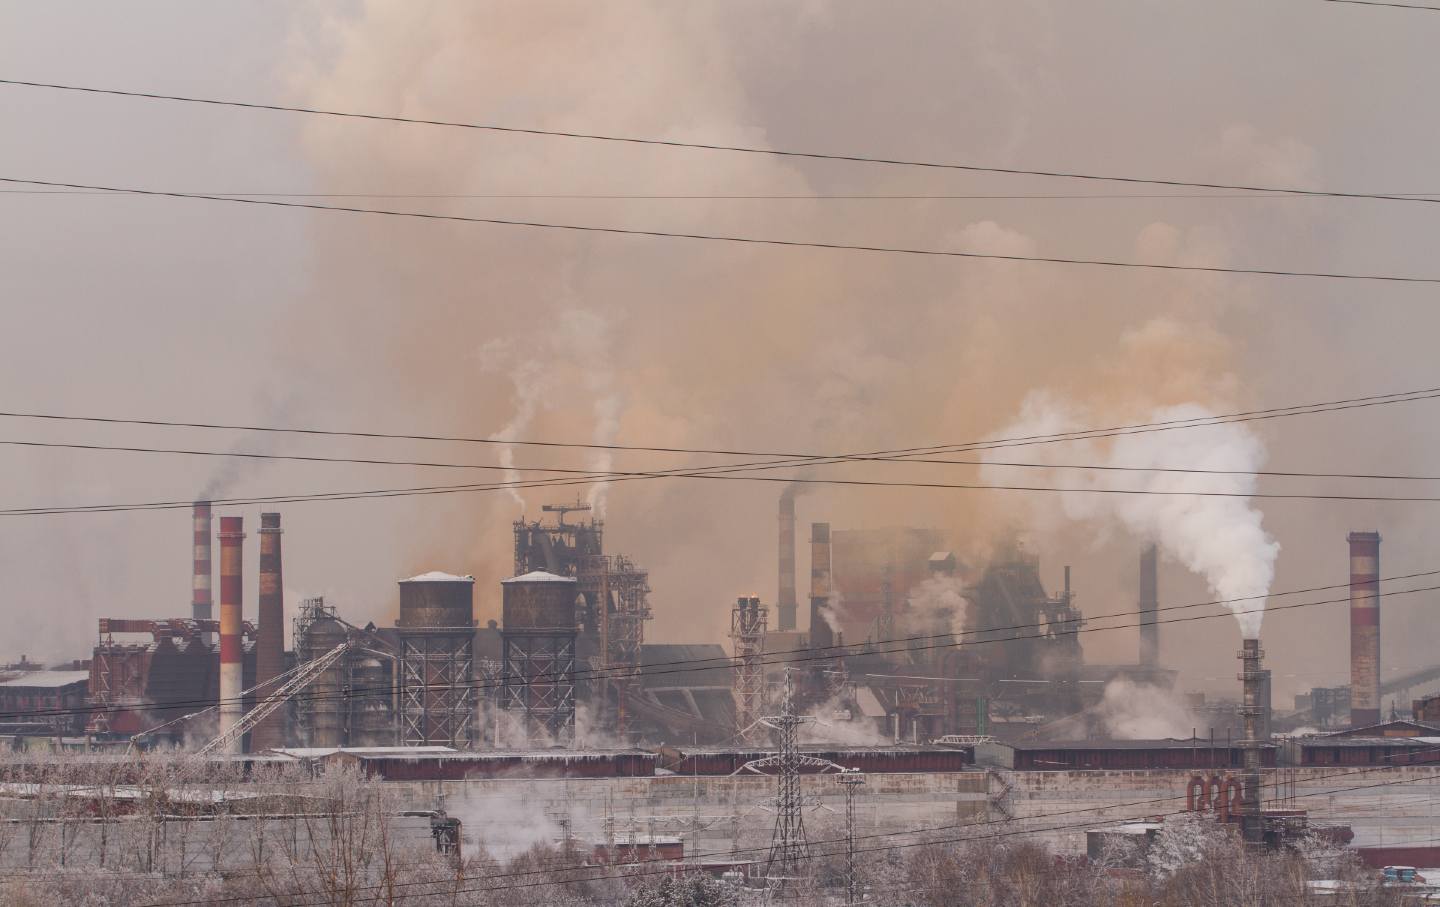 A fossil fuel refinery in Russia.